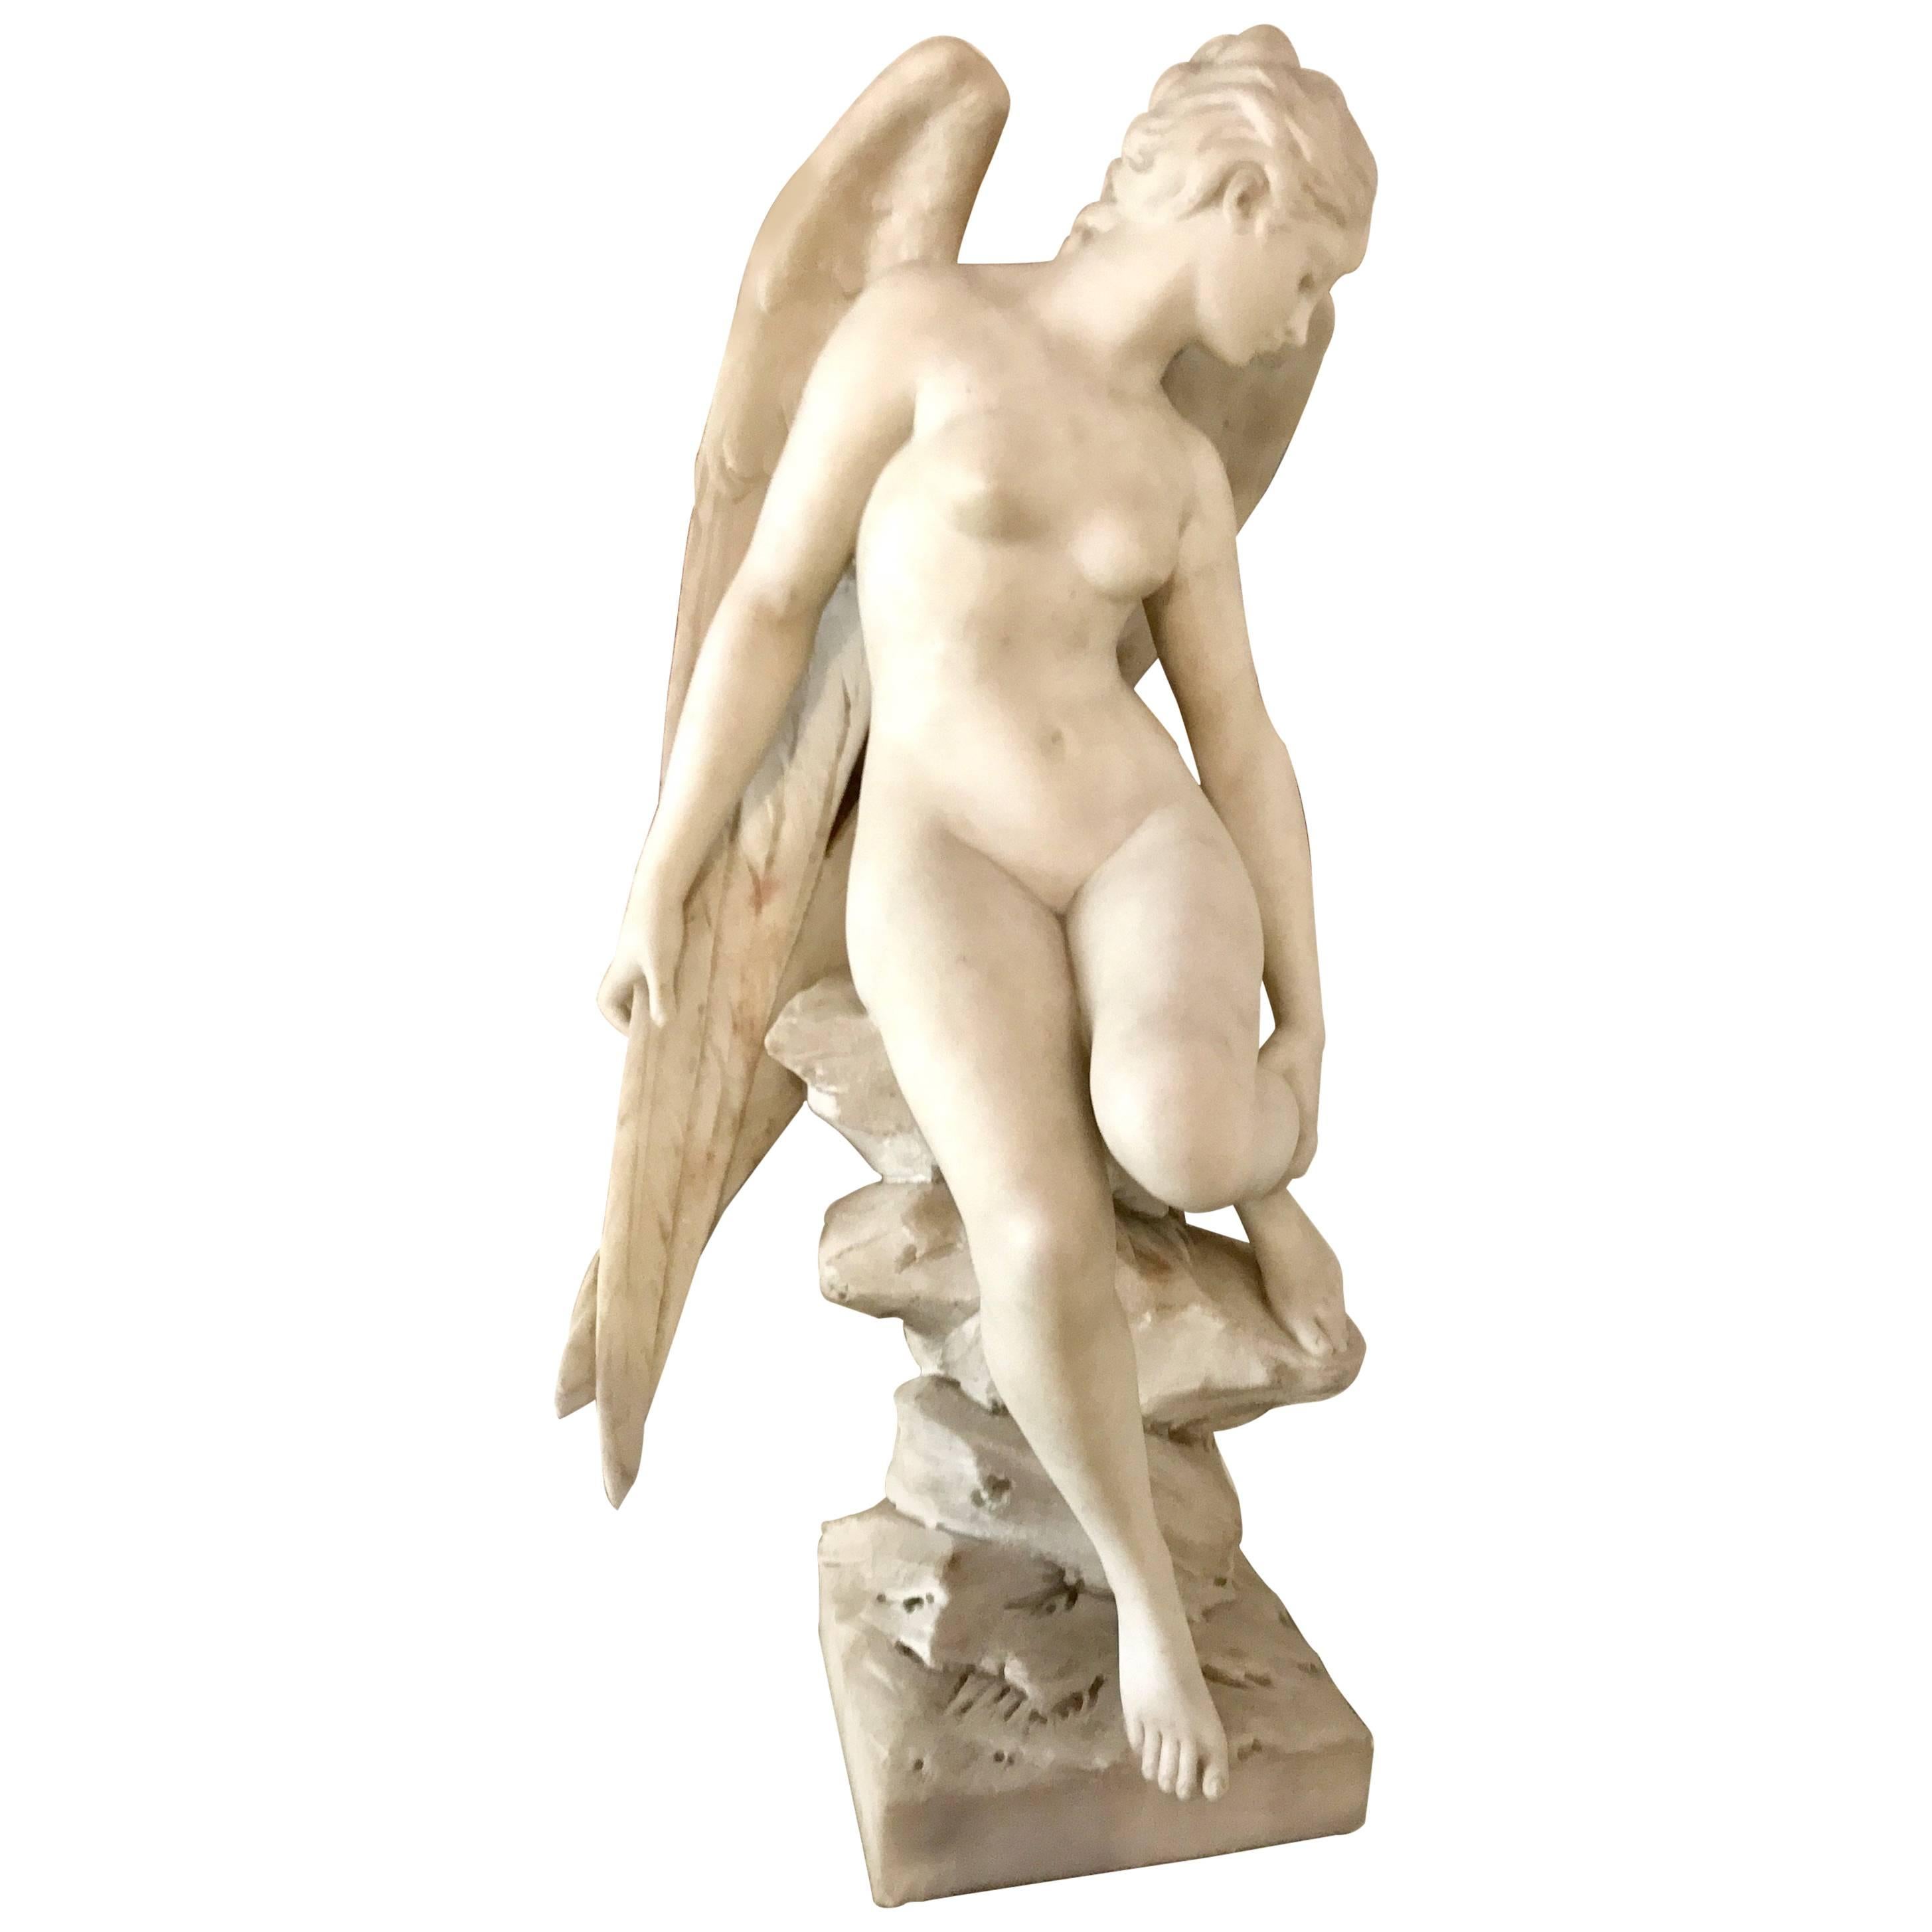 Tycoon's Italian Carrara Marble Angel Sculpture Signed A. Piazza, circa 1890 For Sale